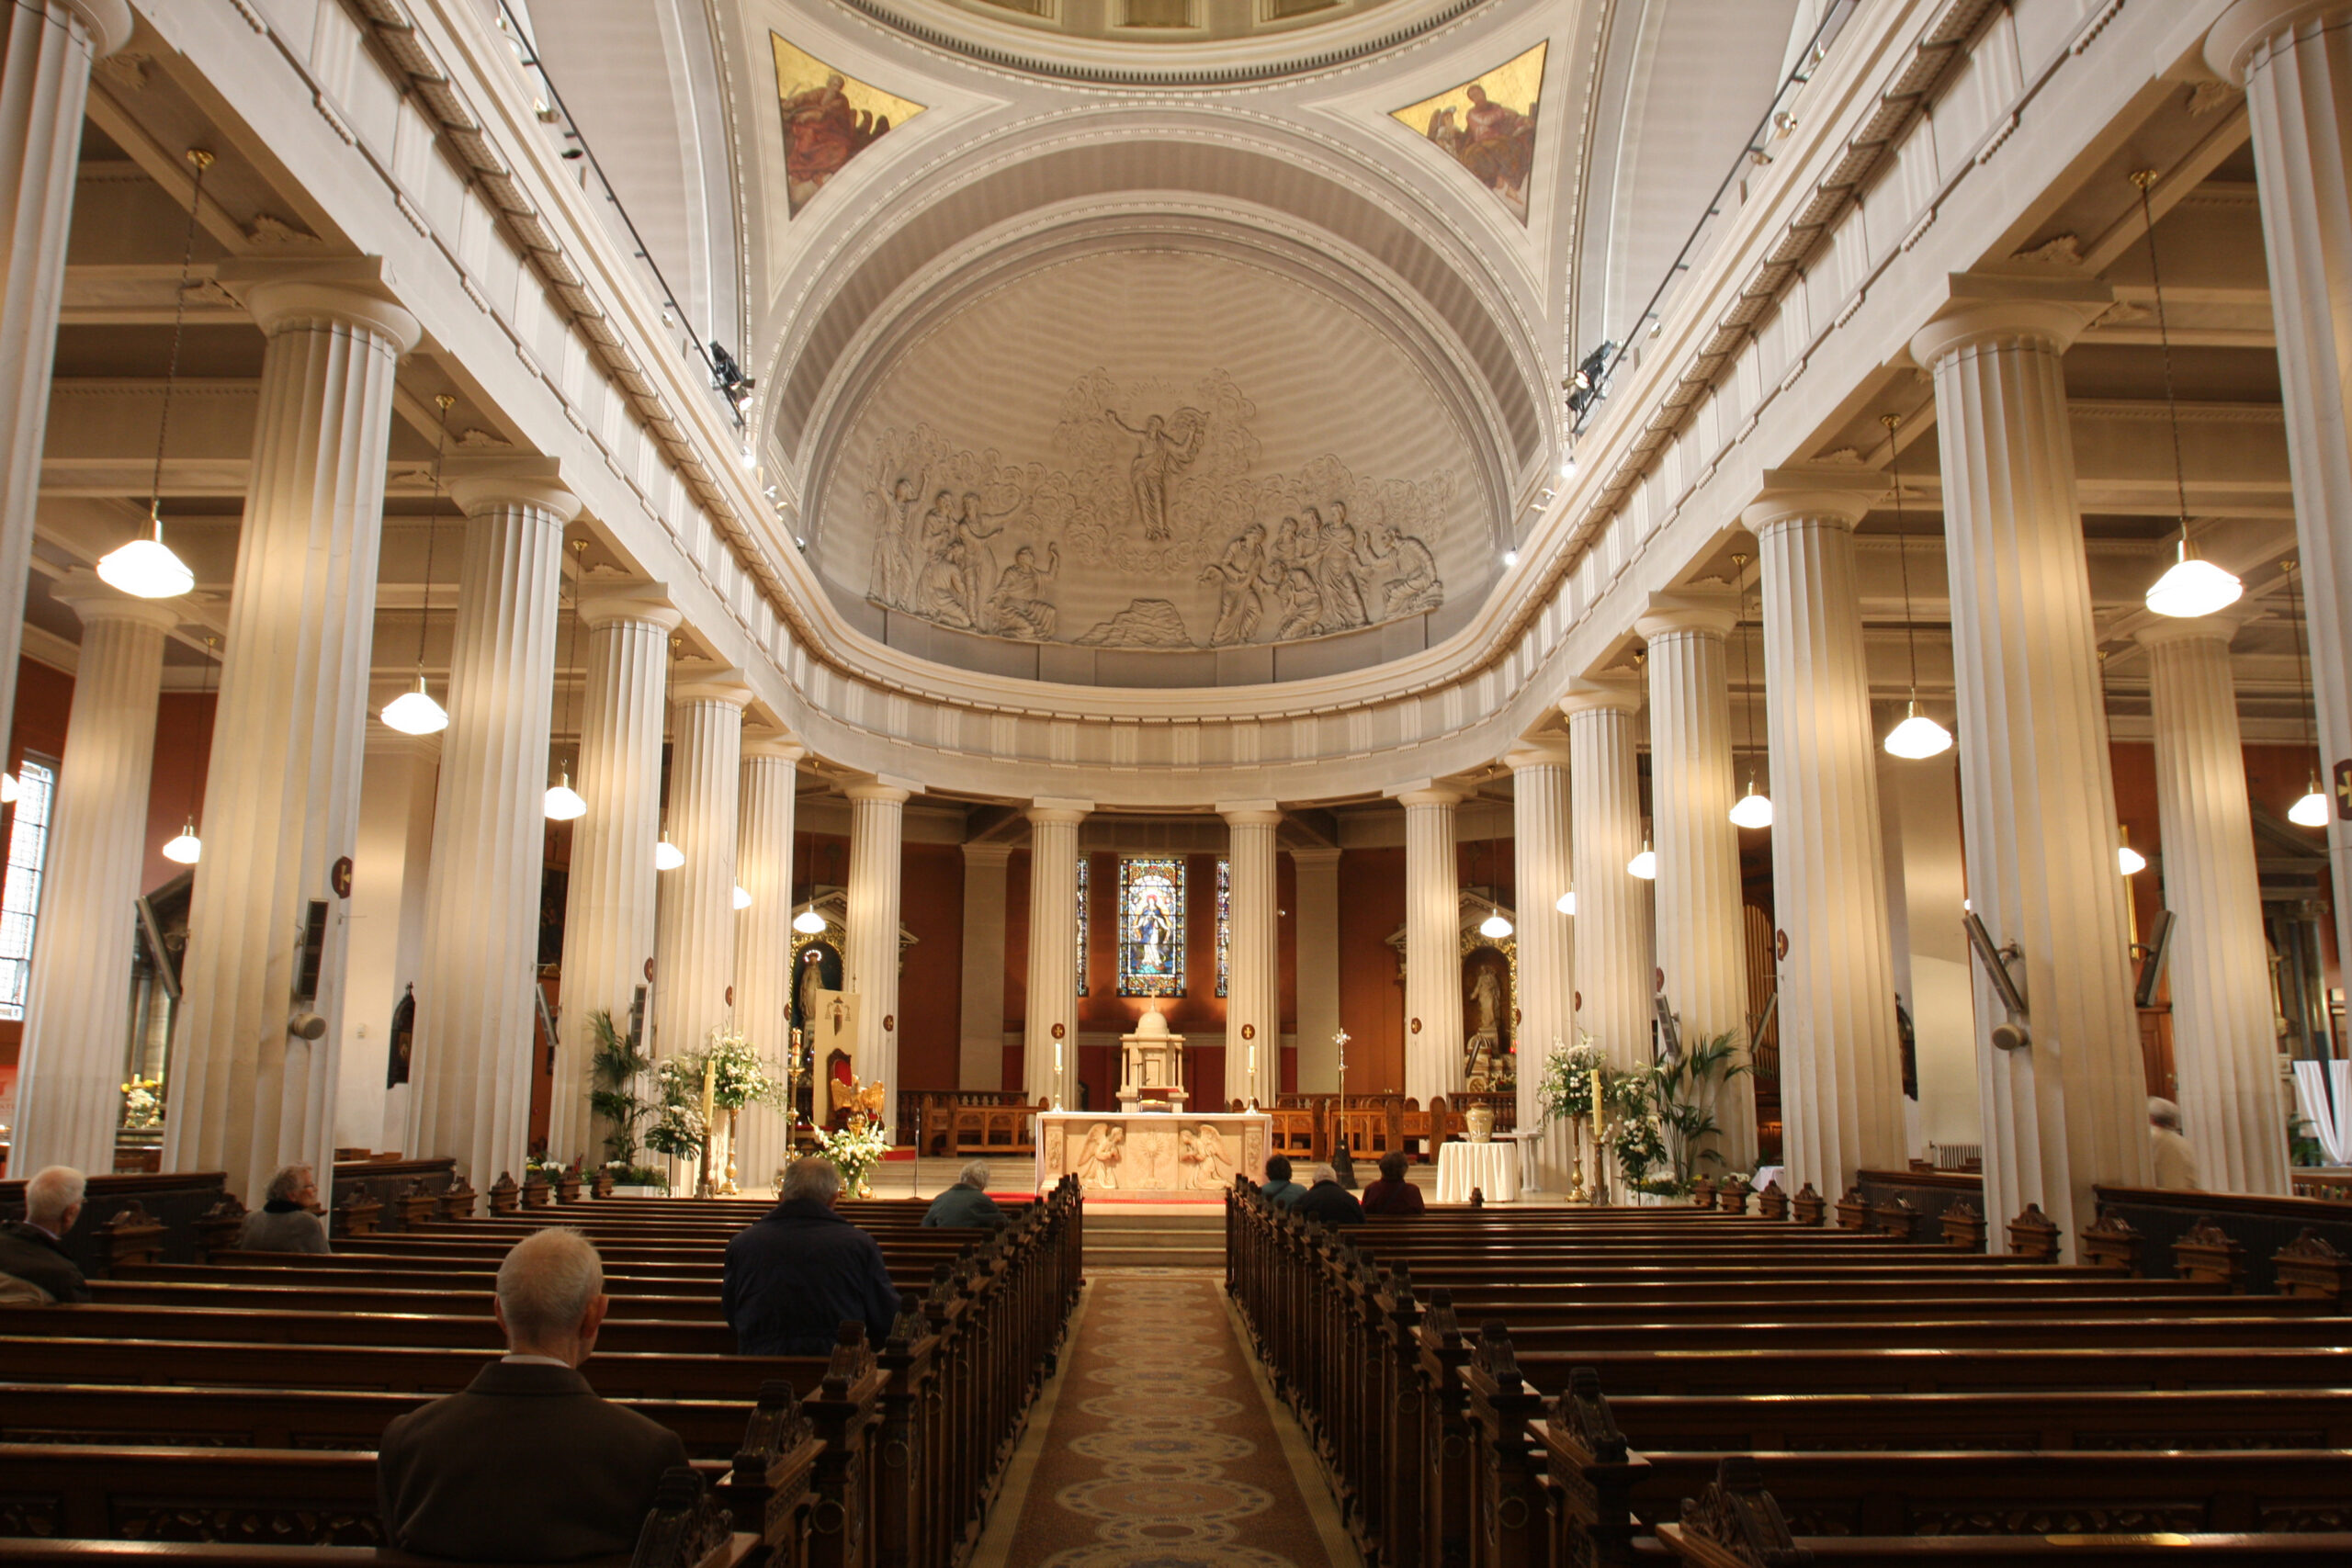 Inside view of cathedral with white columns and round ceiling